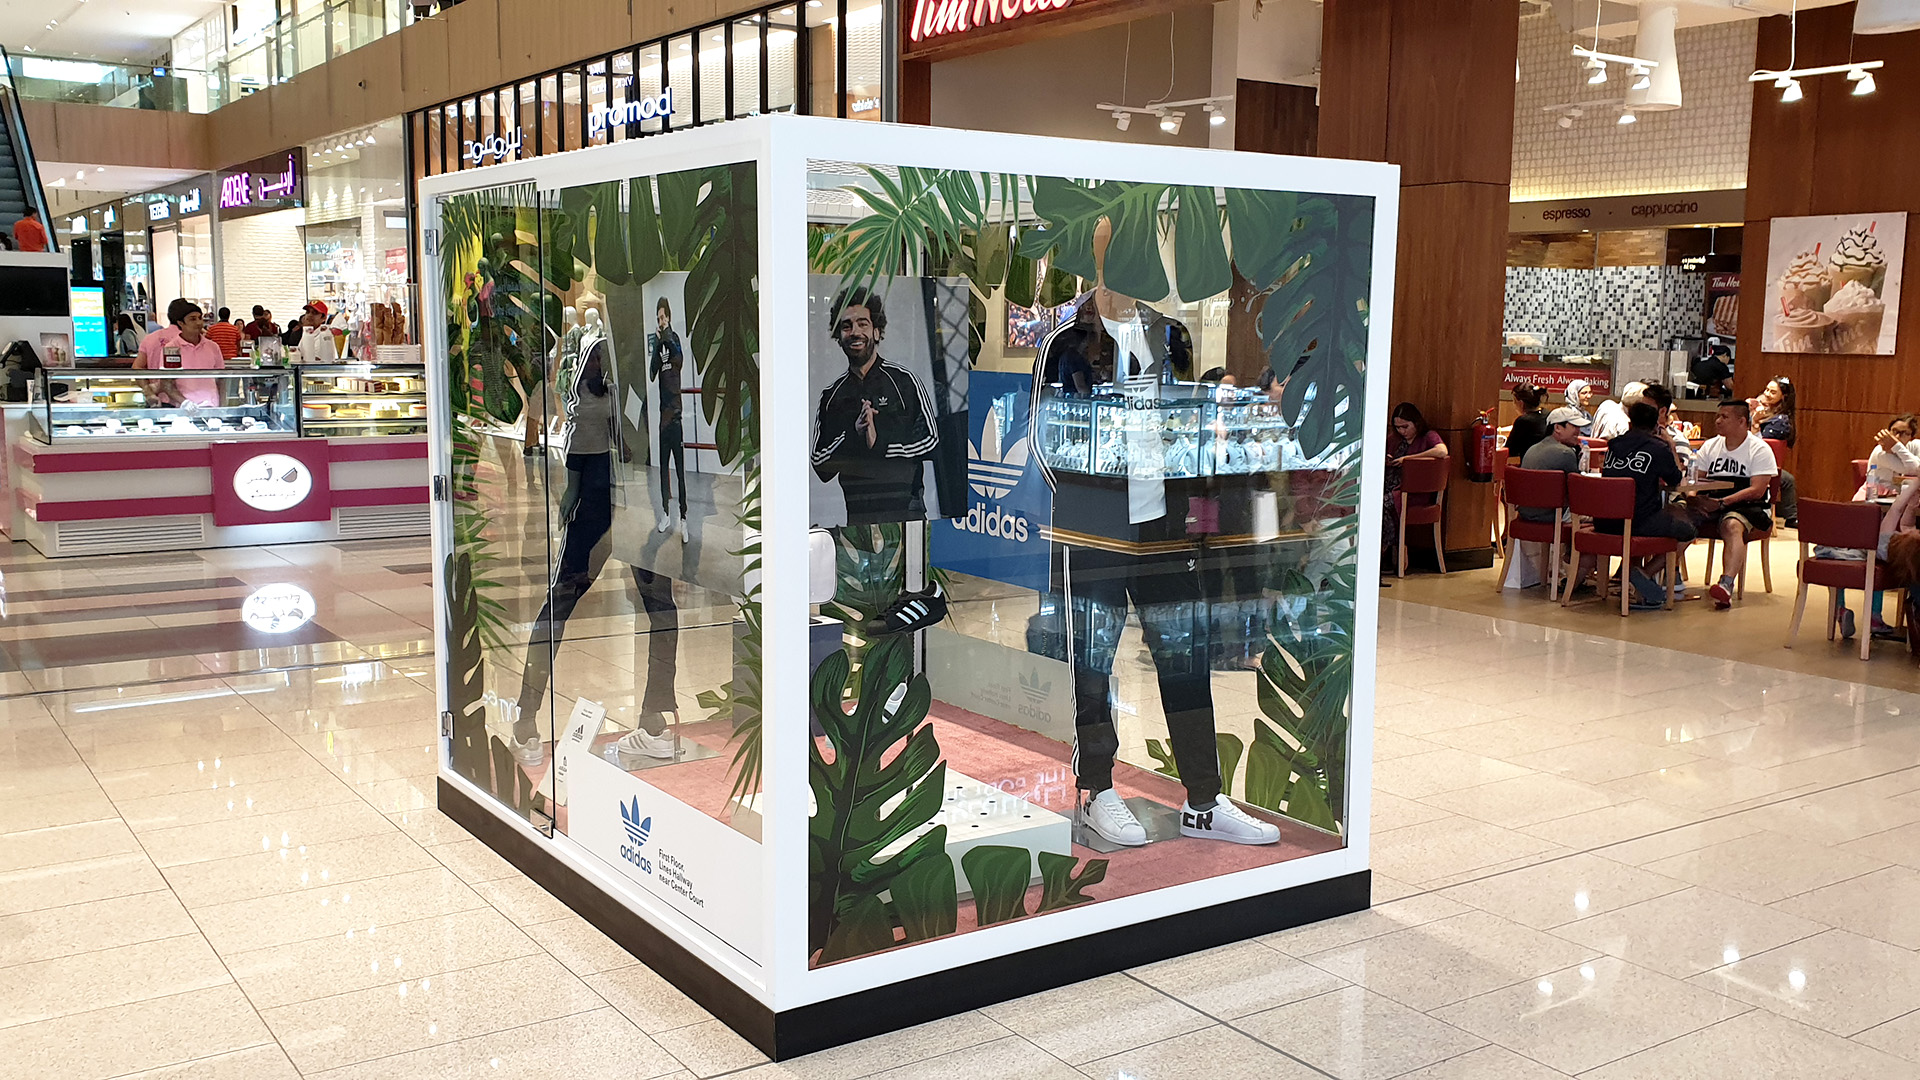 Custom fabricated Window Display Boxes for Doha Festival City made from Steel and Glass by ME Visual. This example features an Adidas campaign including Mohamed Salah